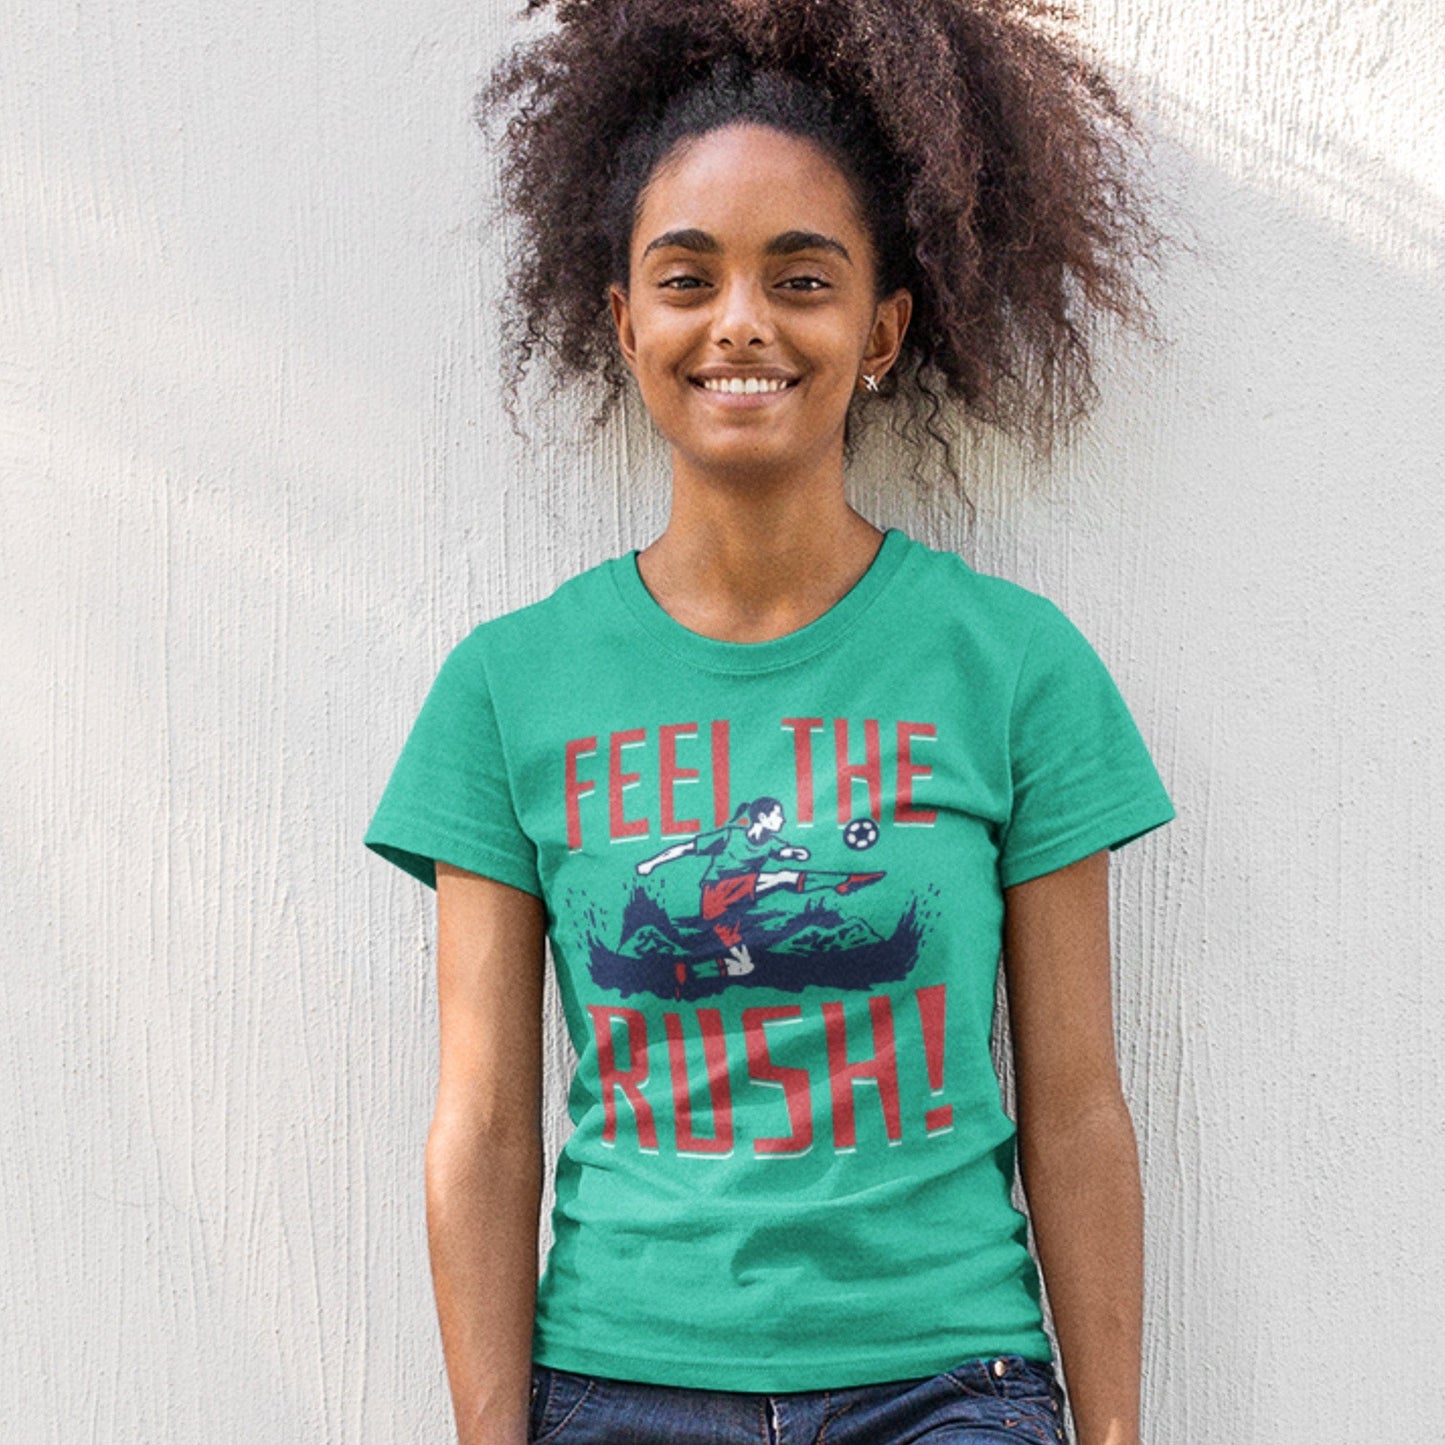 KC Swag Kansas City Current FEEL THE RUSH on teal unisex t-shirt worn by female model leaning against white painted wall